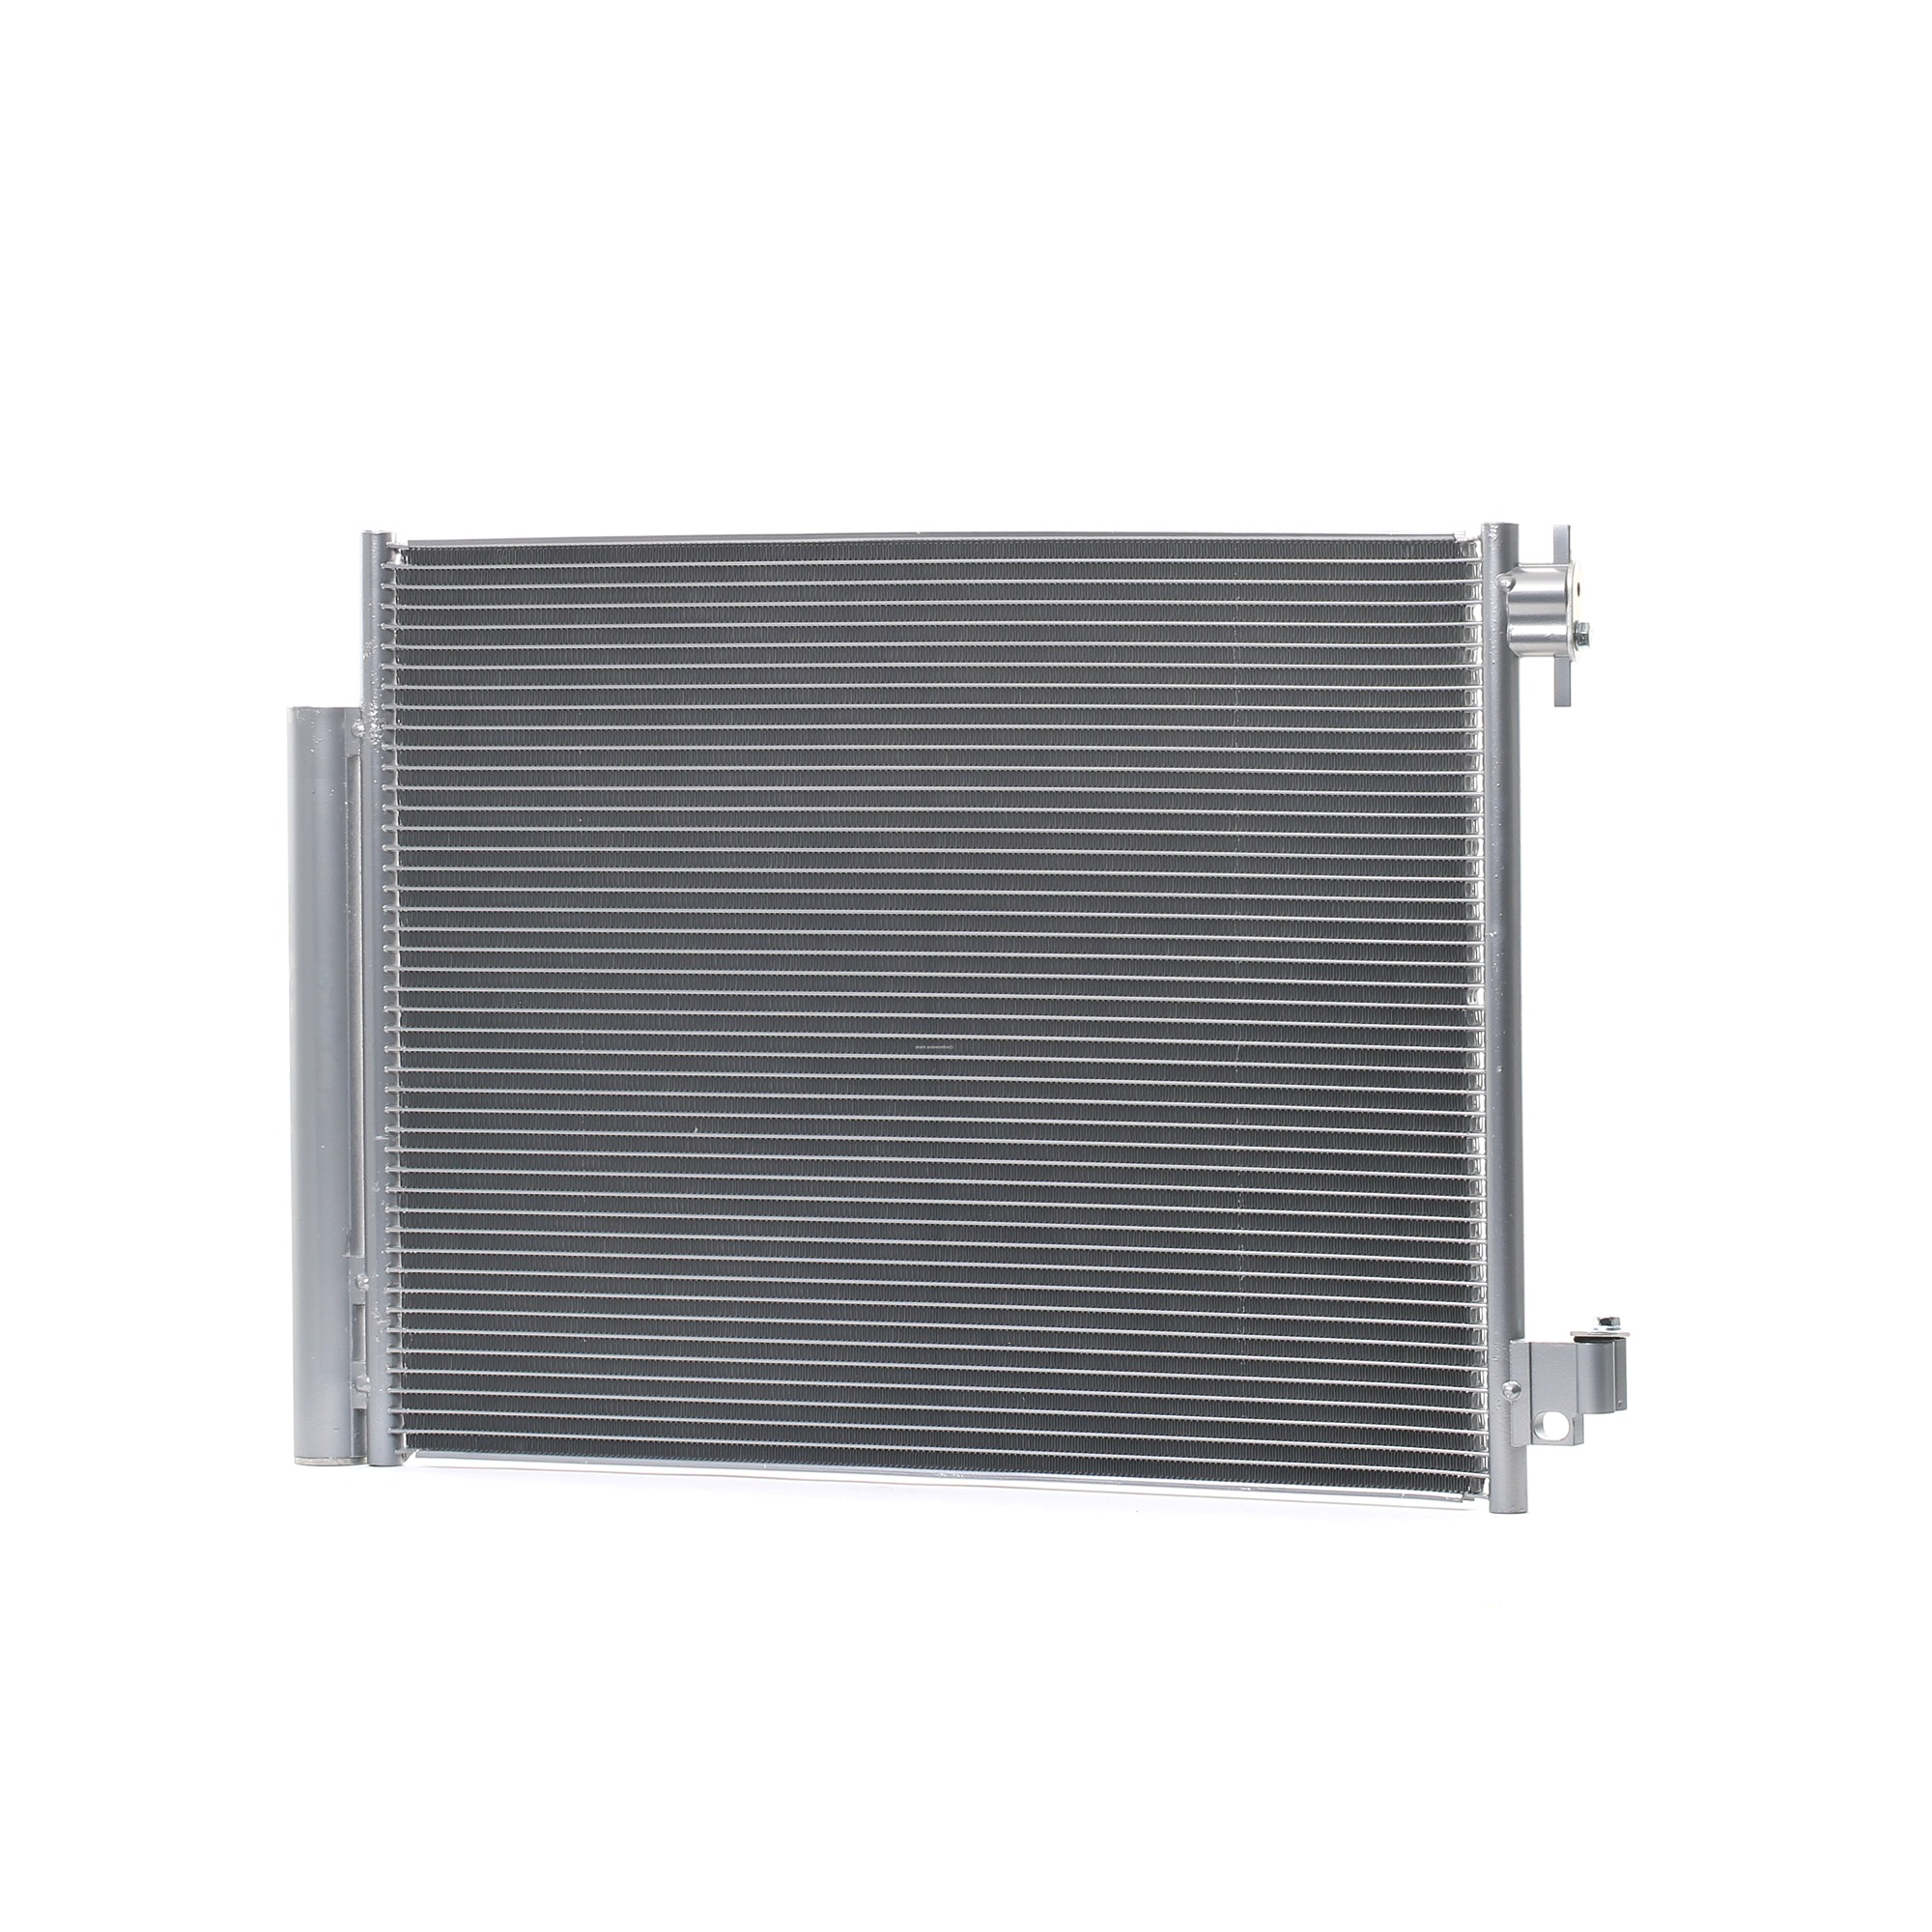 STARK SKCD-0110575 Air conditioning condenser with dryer, 541 x 378 x 12 mm, 15,5mm, 10,1mm, Aluminium